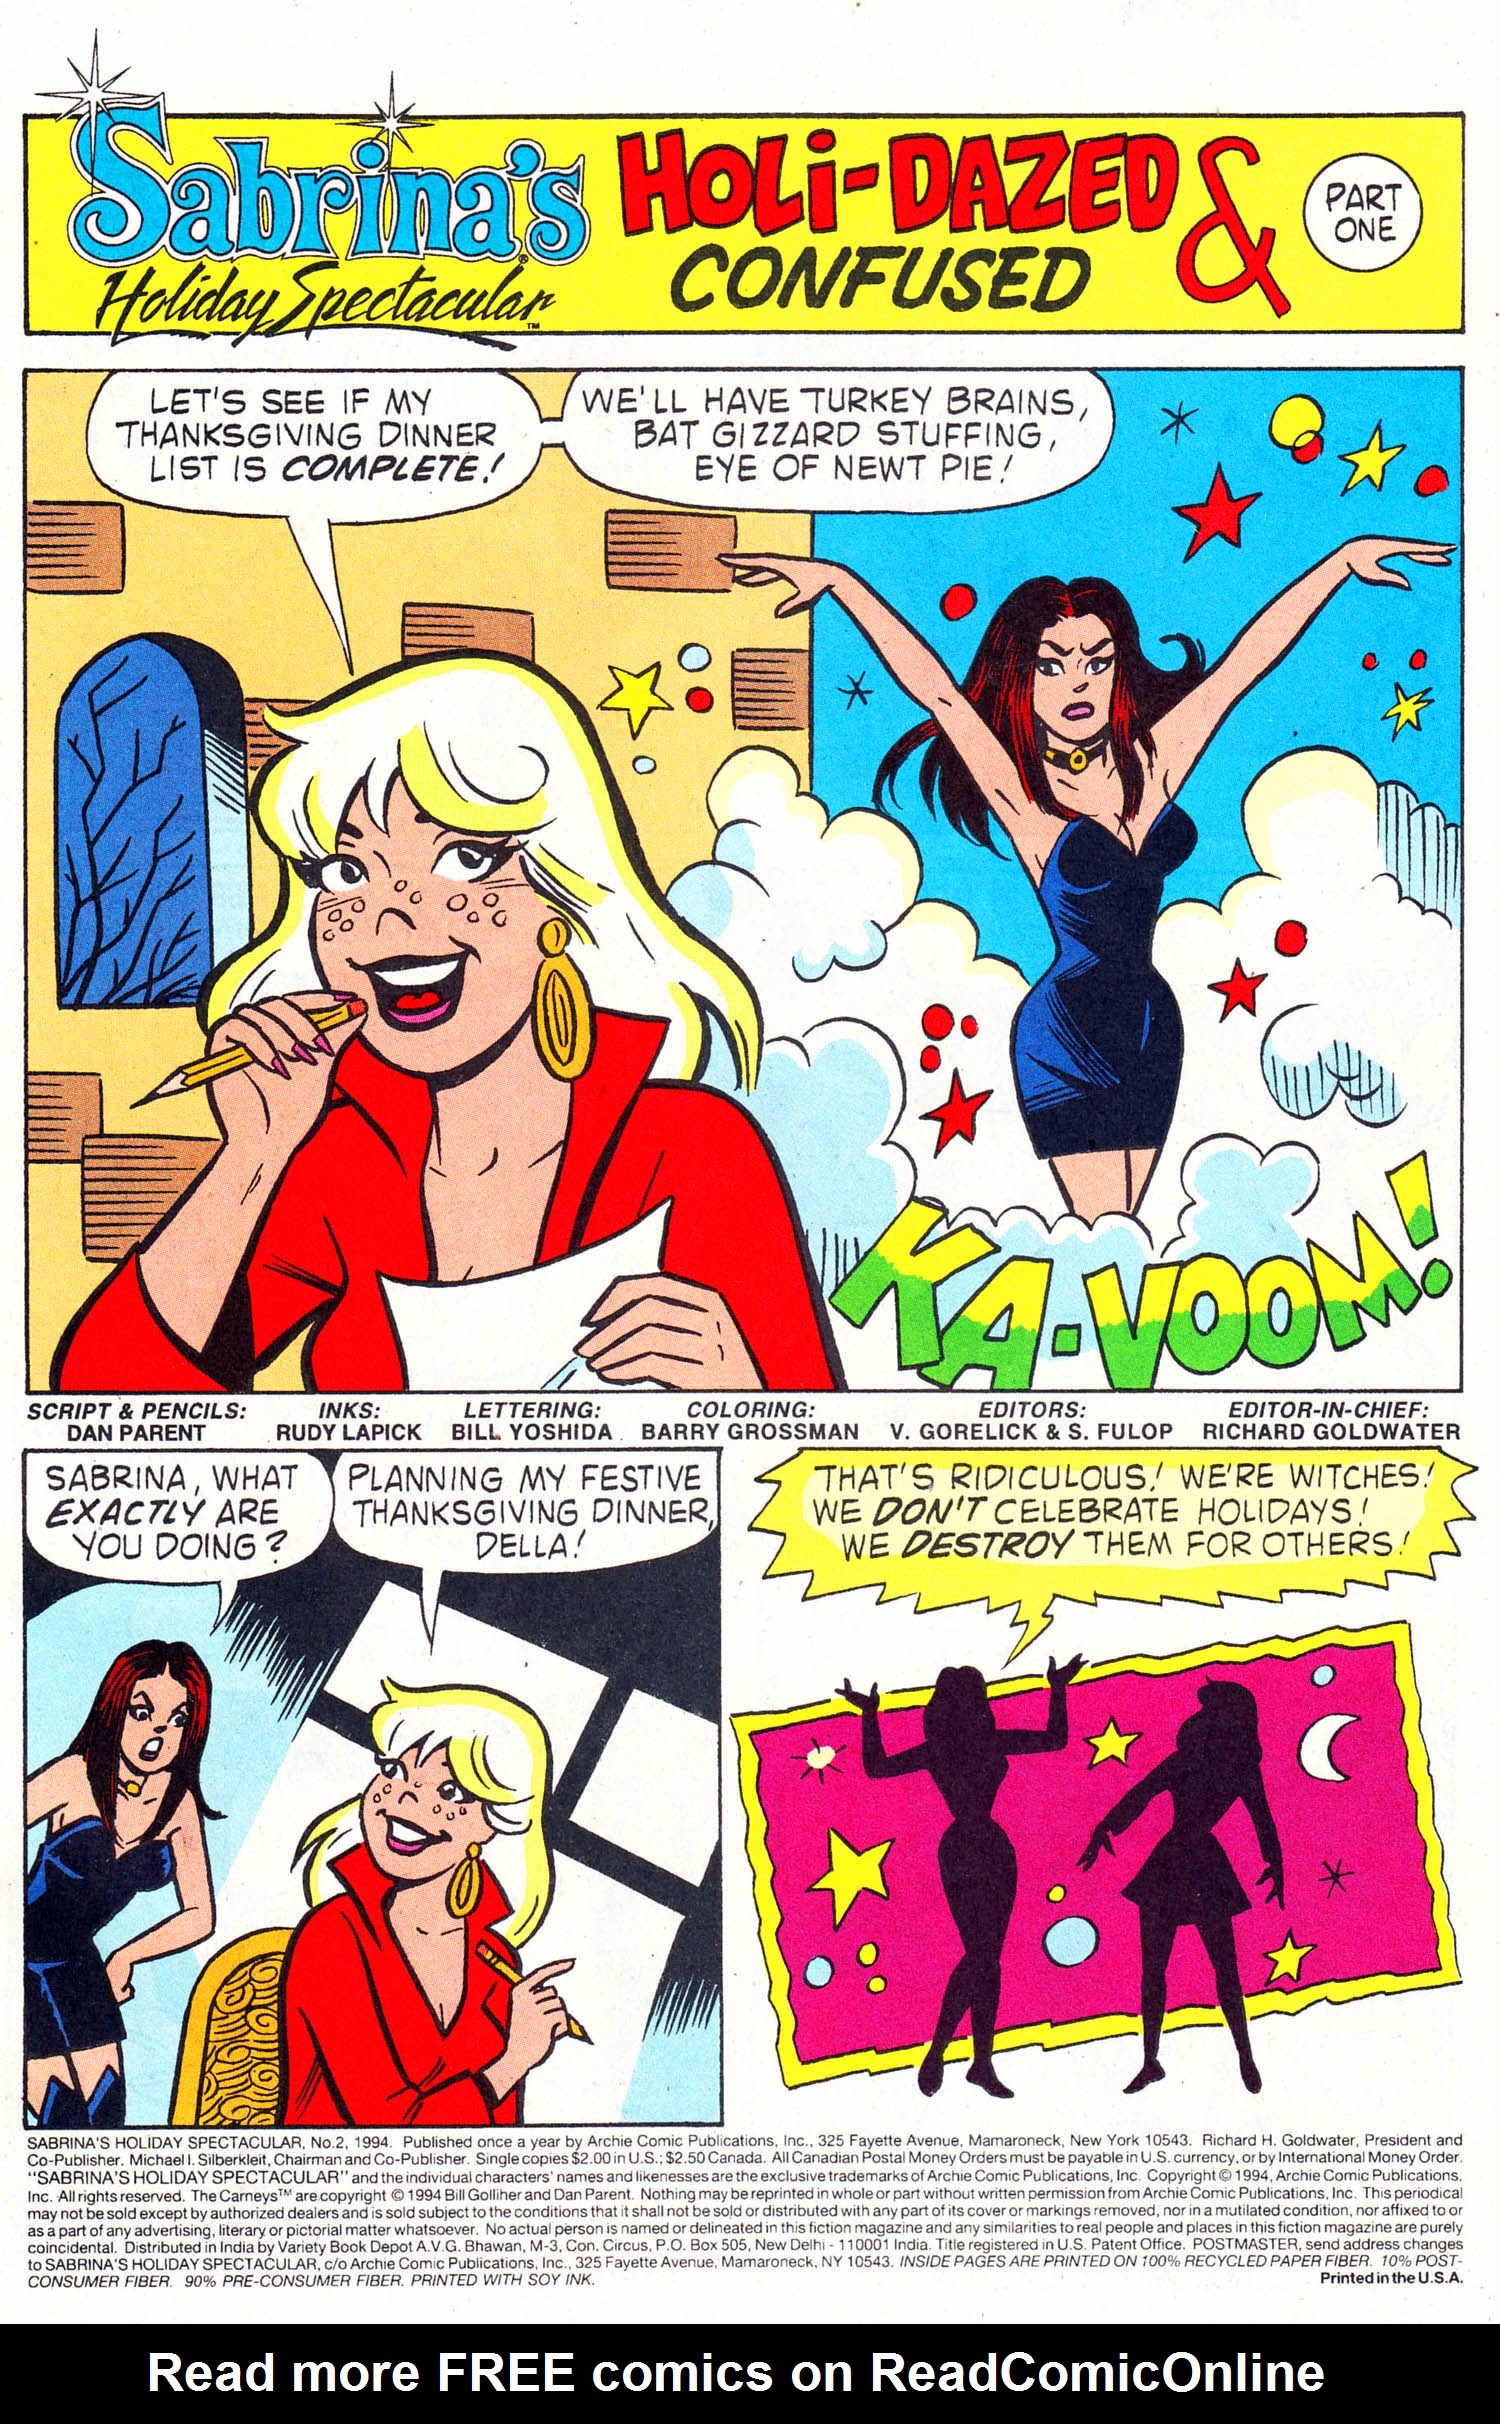 Read online Sabrina's Holiday Spectacular comic -  Issue #2 - 3